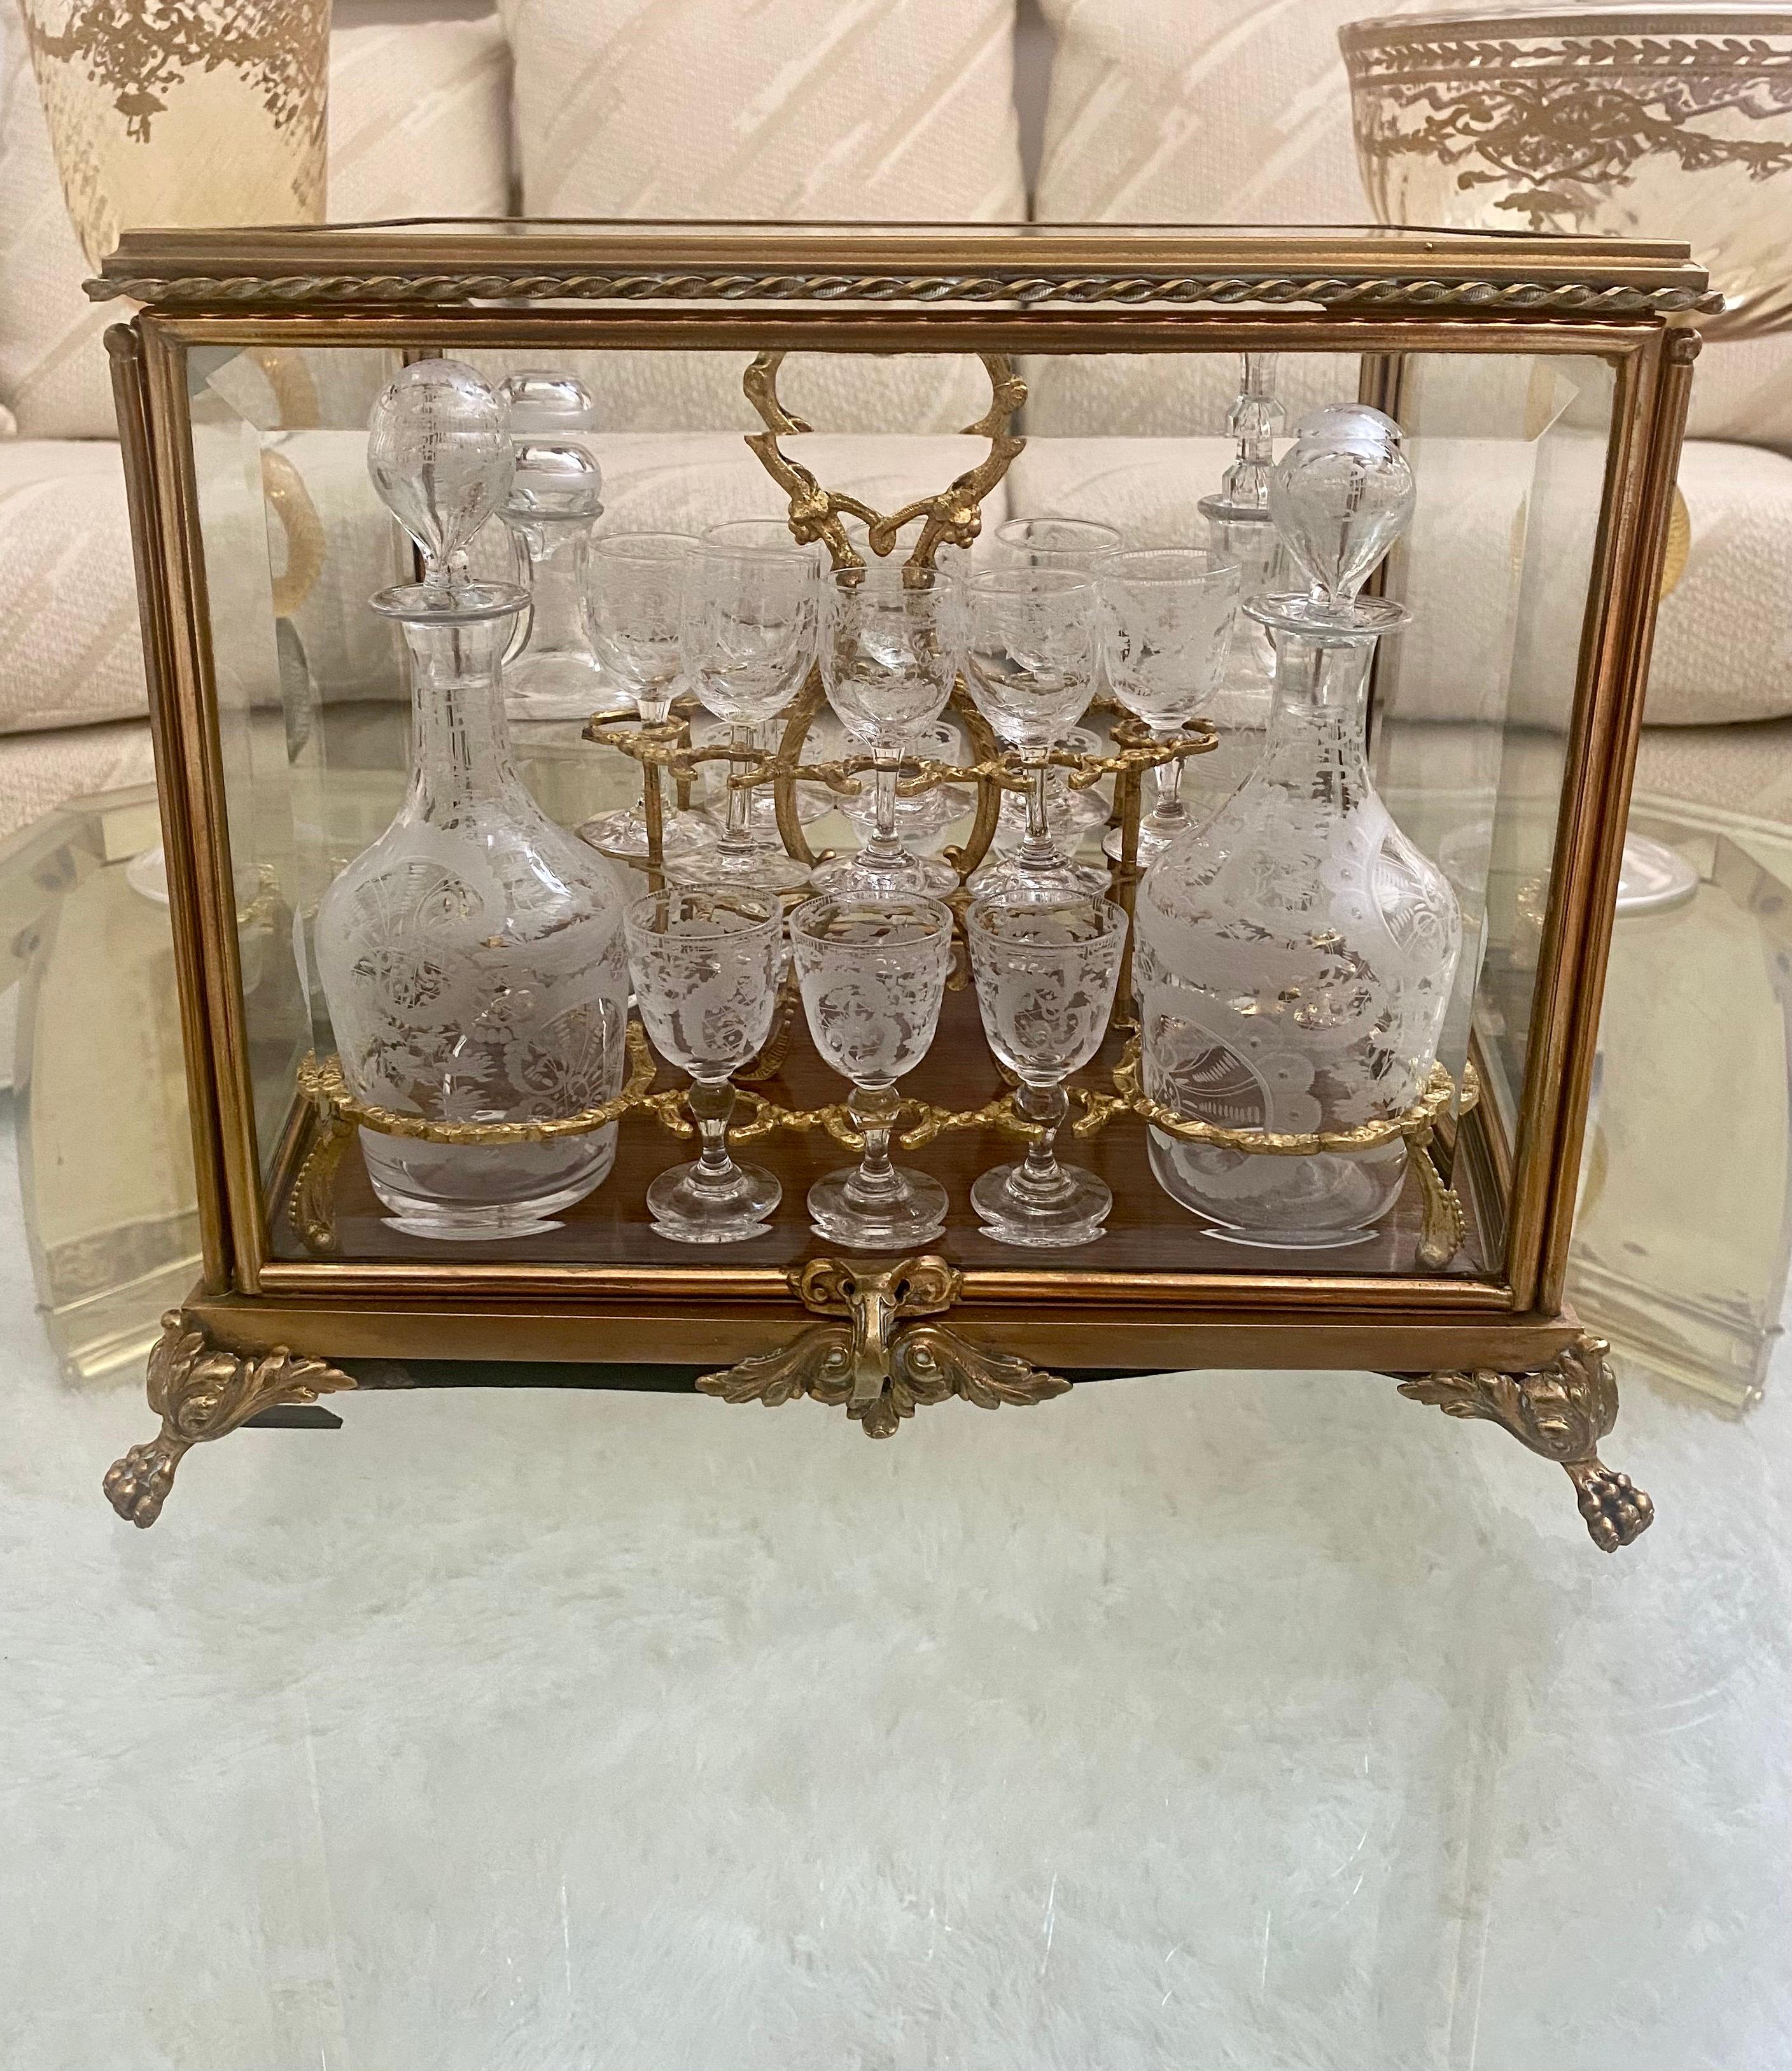 A delightfully designed gilt bronze and etched crystal glass set, in the style of Baccarat. The set includes fourteen glasses and four decanters with etched embellishments. The set is placed on a lift out  custom gilt  tray inside of a beveled